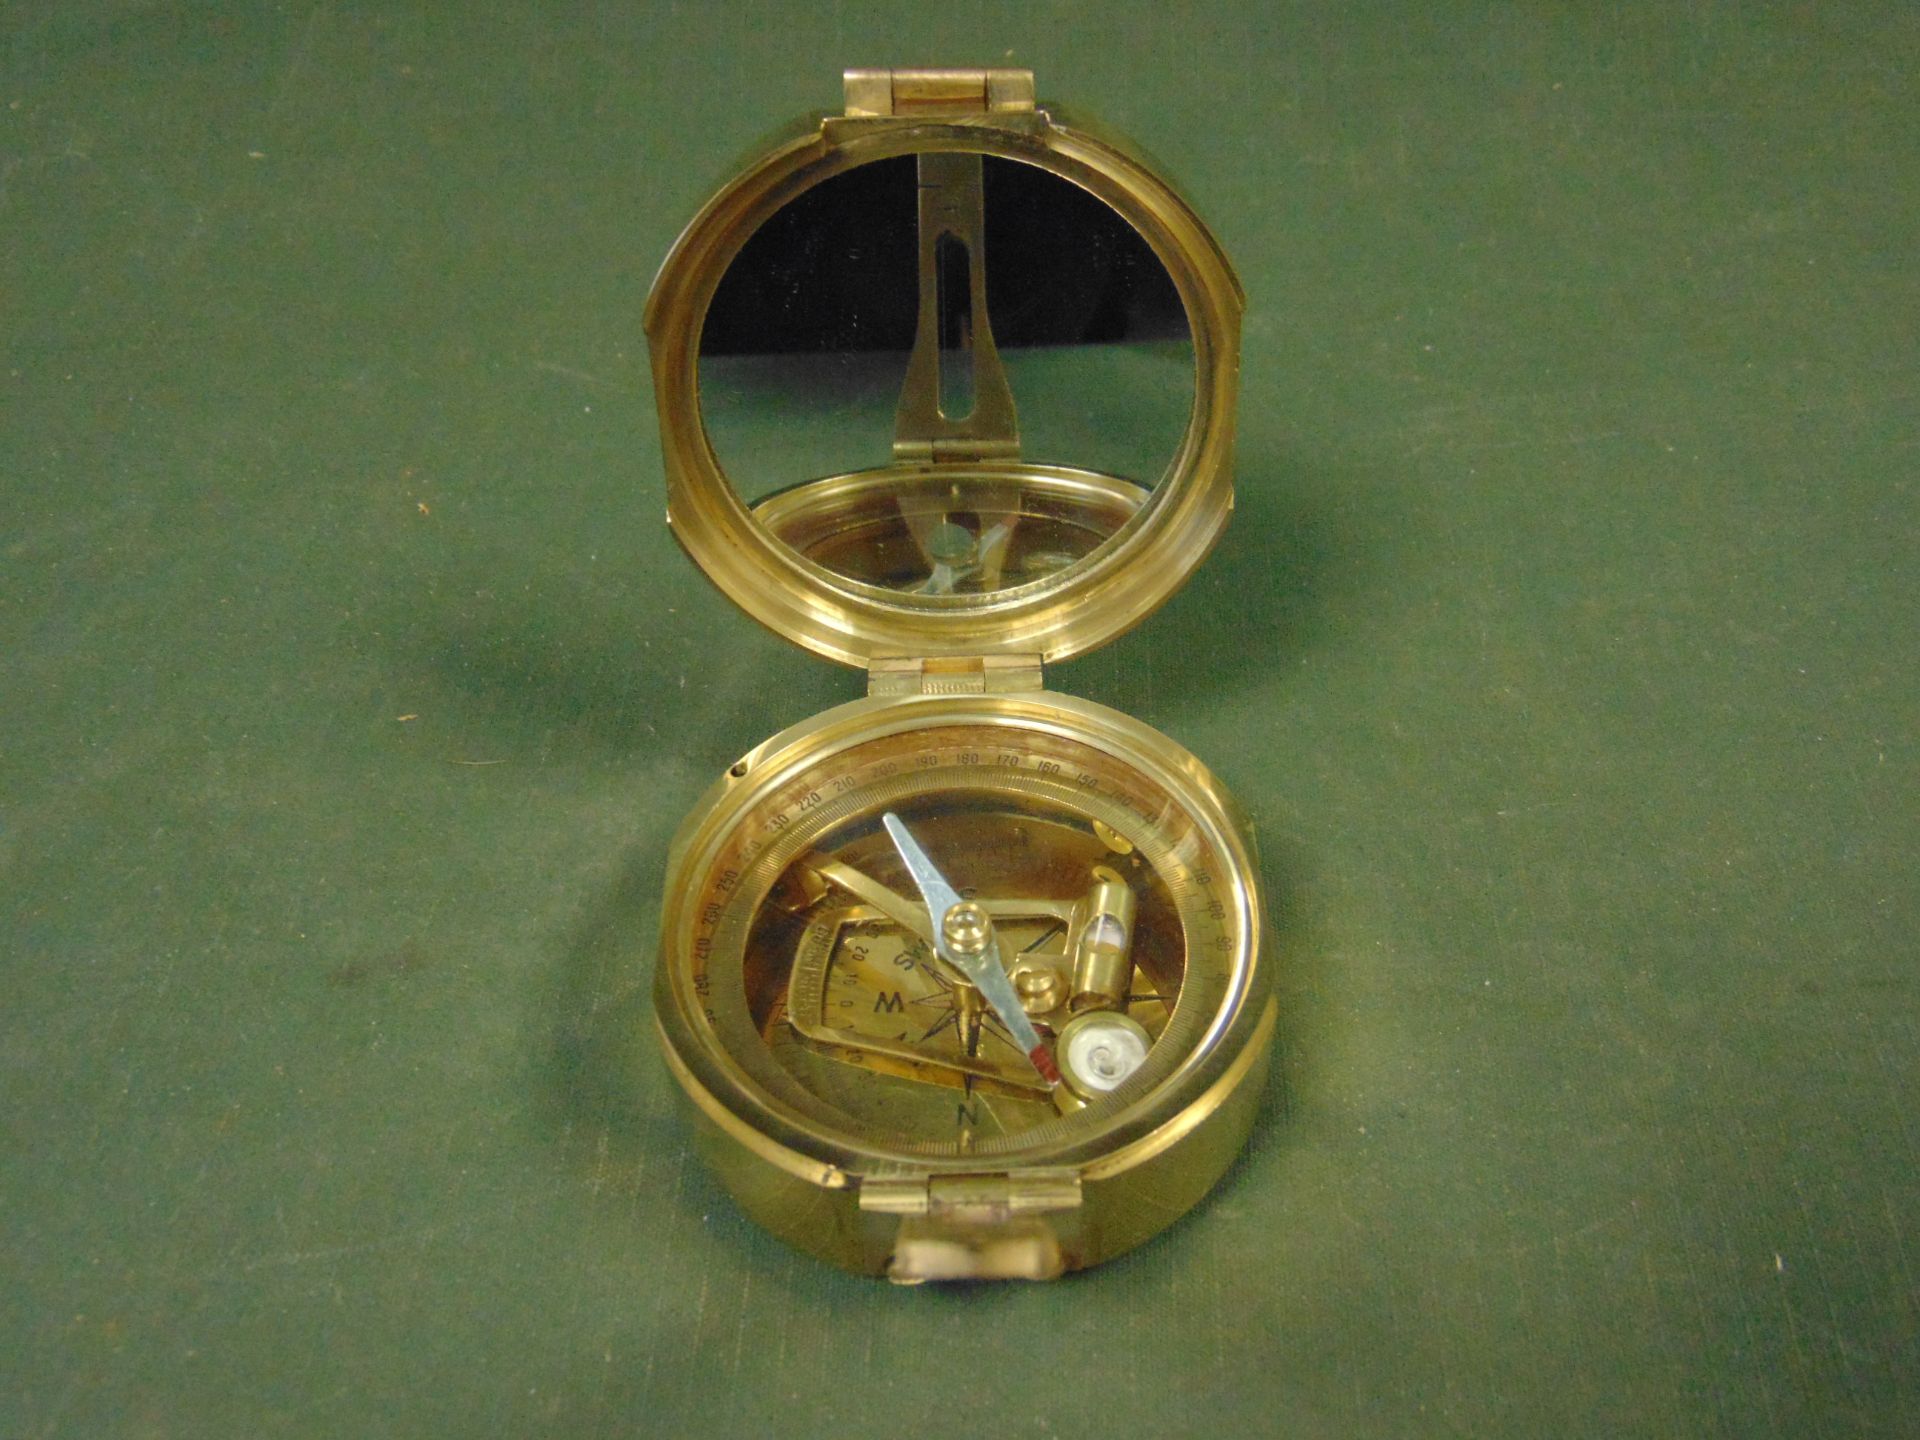 VERY NICE STANLEY BRASS PRISMATIC COMPASS REPRO